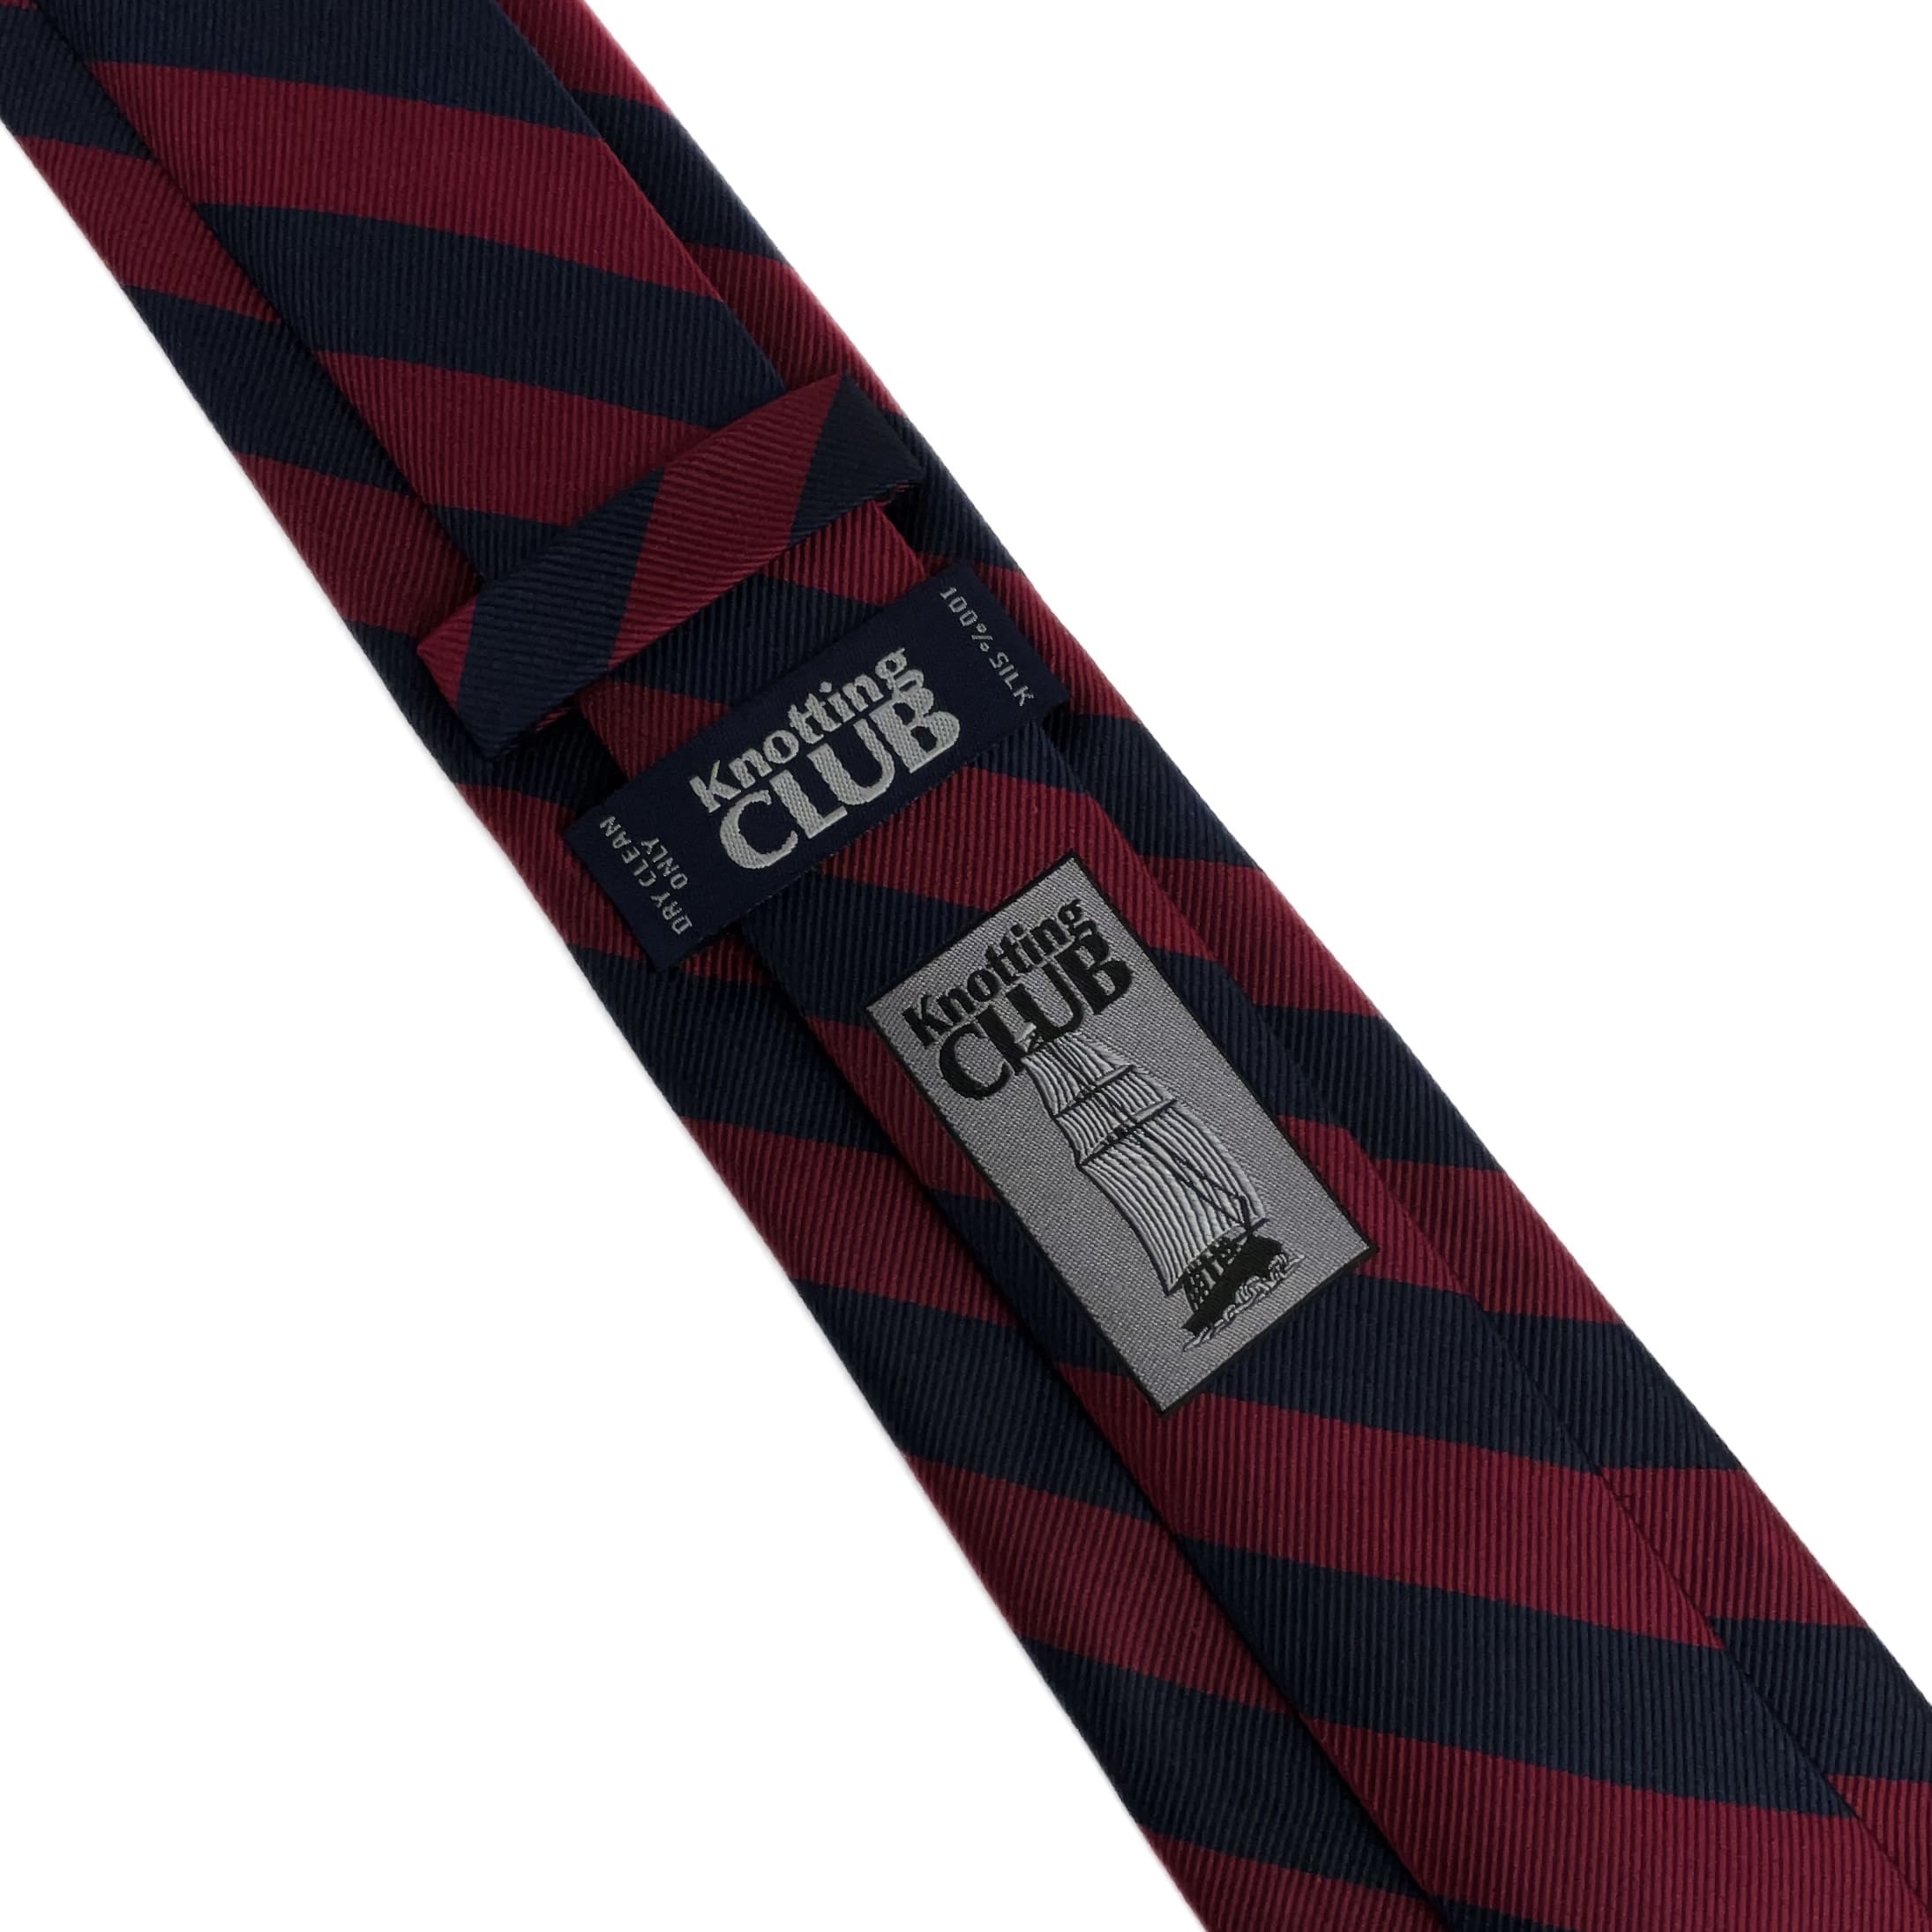 Red and Navy Blue Striped Silk Regimental tie's logo and tag on the back side of the tie